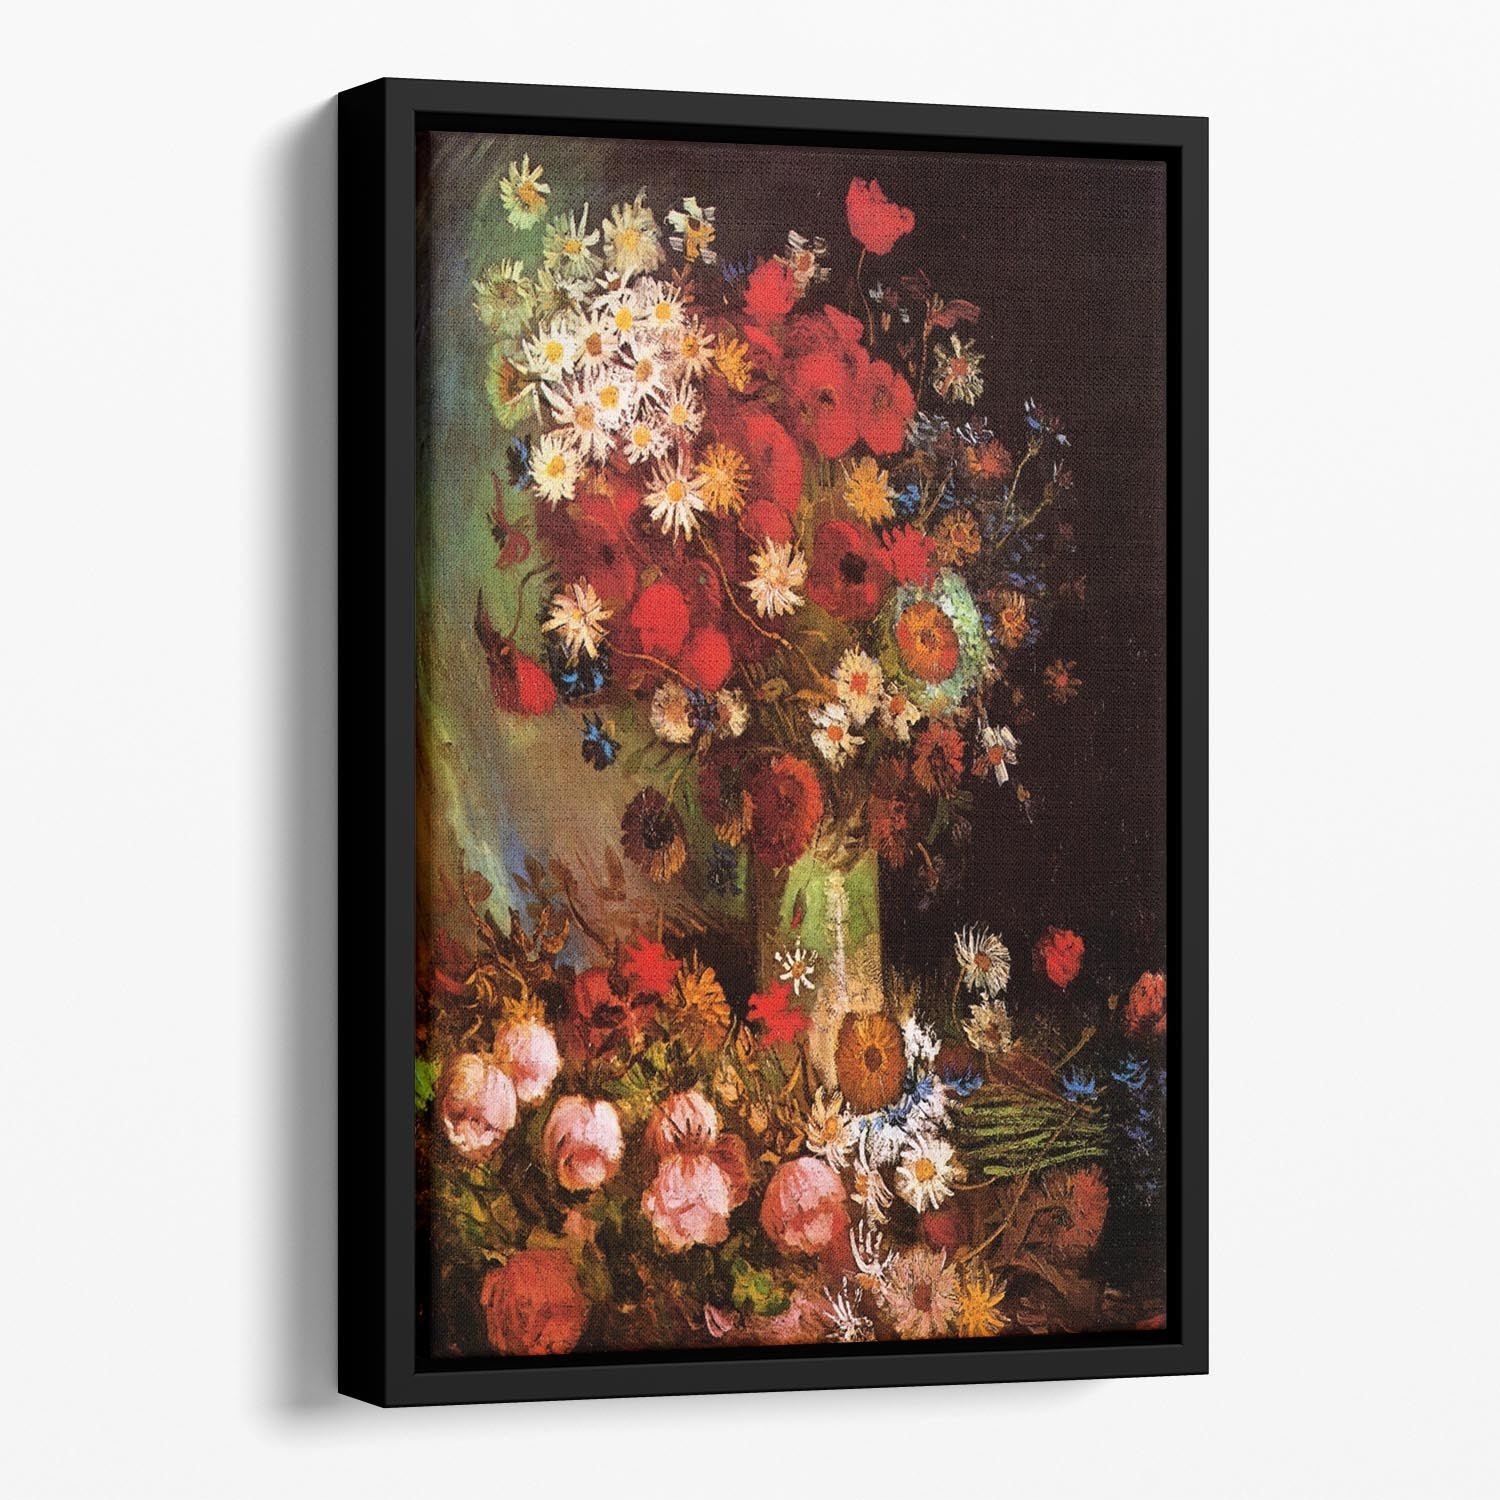 Vase with Poppies Cornflowers Peonies and Chrysanthemums by Van Gogh Floating Framed Canvas